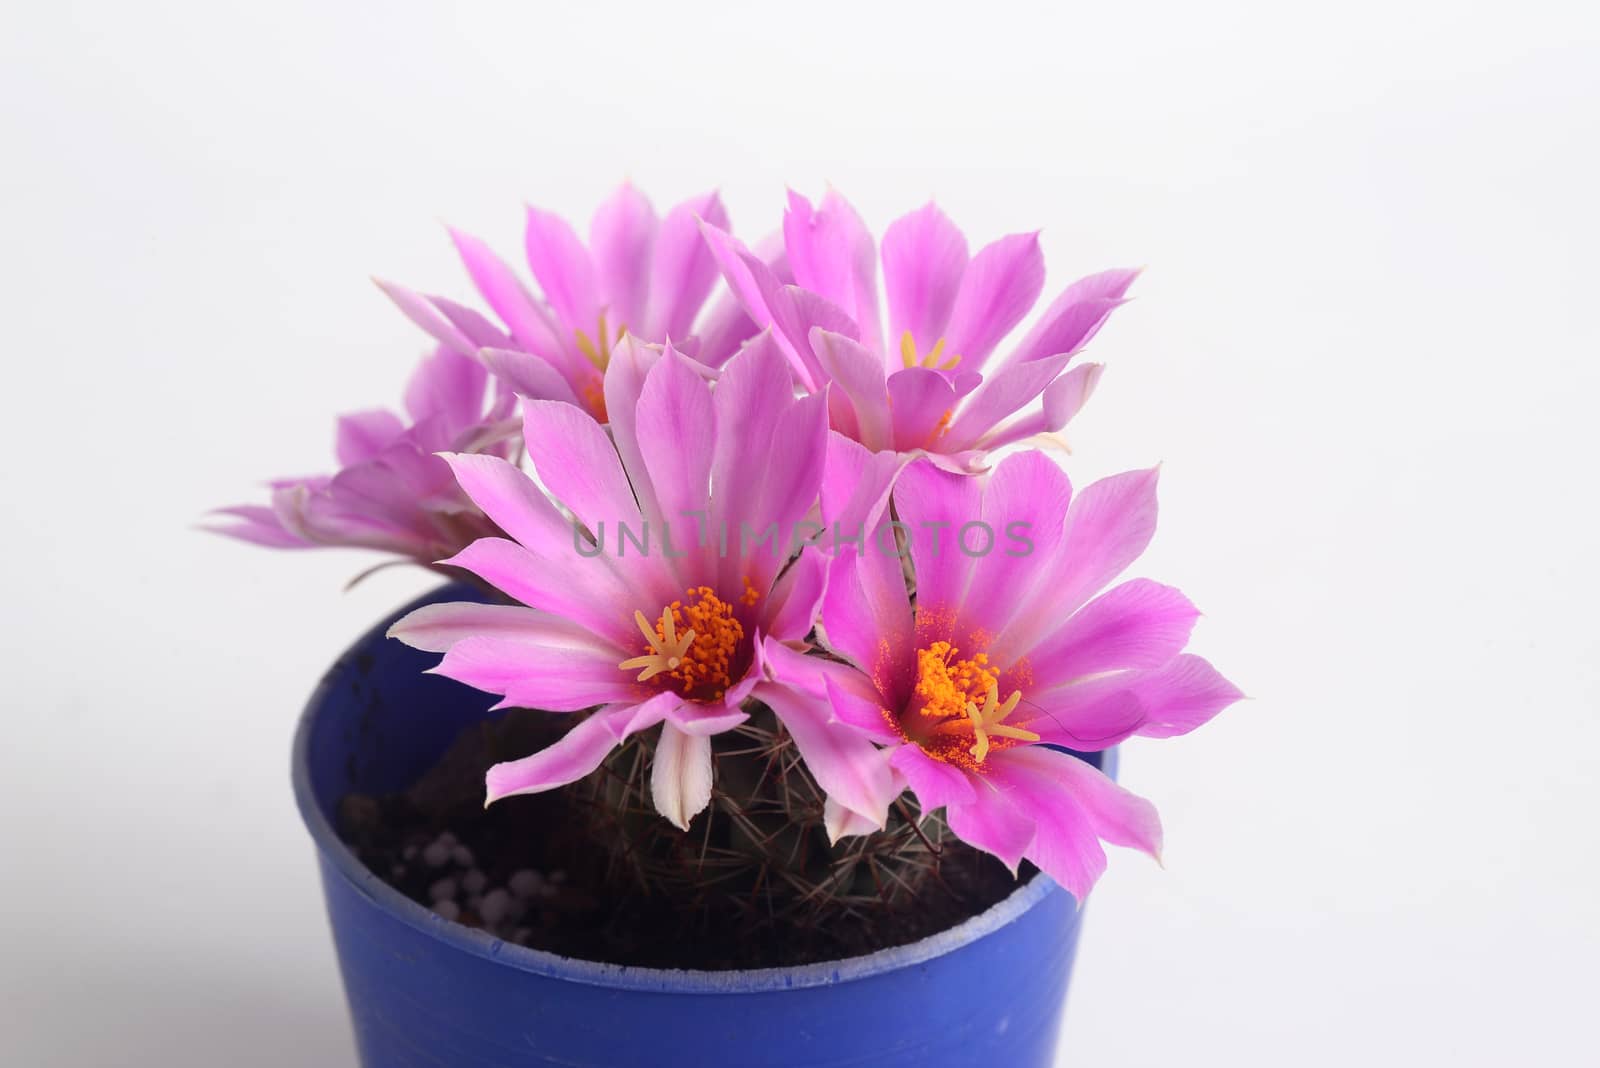 Blooming pink  flower of Mammillaria schumannii  cactus on  white  background by ideation90